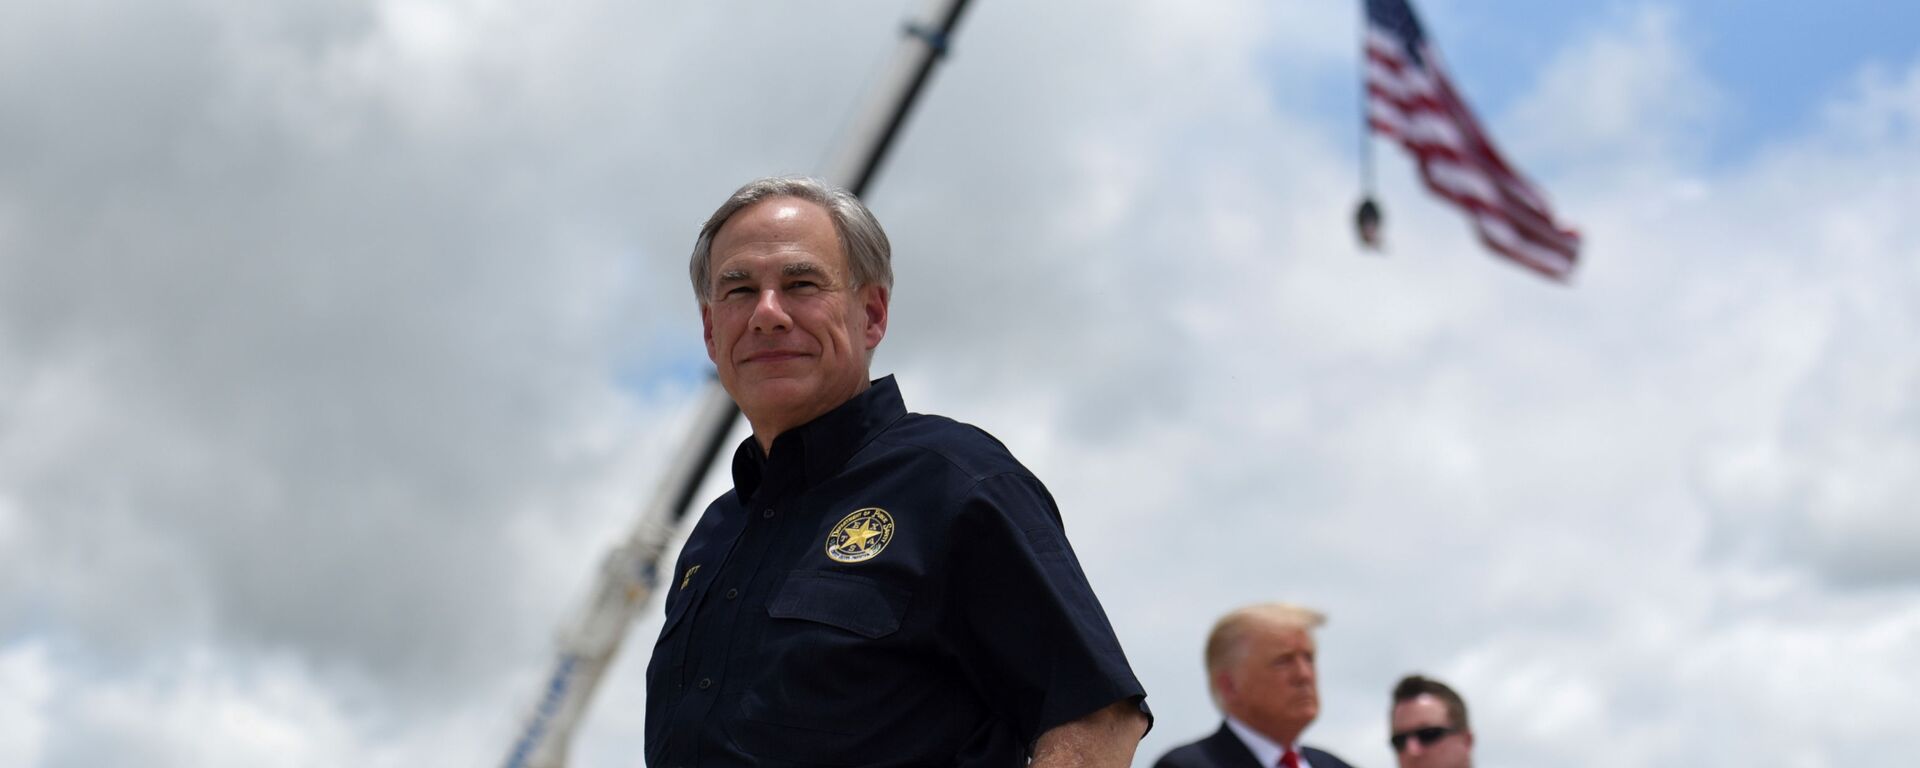 Texas Governor Greg Abbott exits the stage with former U.S. President Donald Trump after a visit to an unfinished section of the wall along the U.S.-Mexico border in Pharr, Texas, U.S. June 30, 2021. - Sputnik International, 1920, 31.08.2021